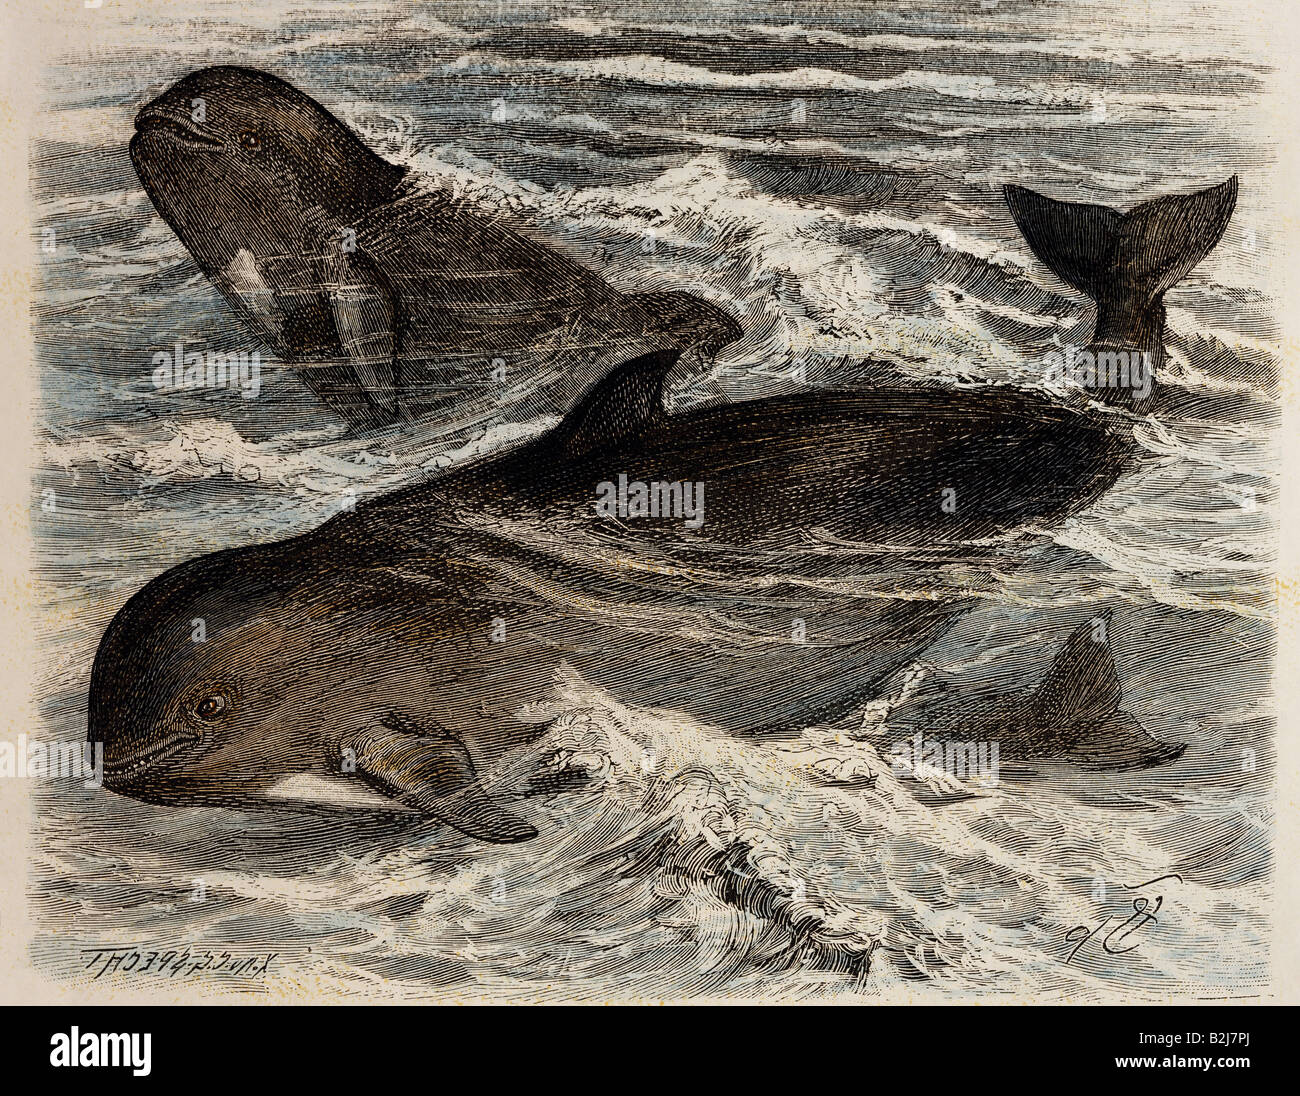 zoology, mammals / mammalian, dolphins (Delphinidae), pilot whale (Globiocephalus melas), wood engraving by F. Specht, 'Brehms Life of Animals' ('Brehms Tierleben'), Leipzig and Vienna, 1893, private collection, , Stock Photo